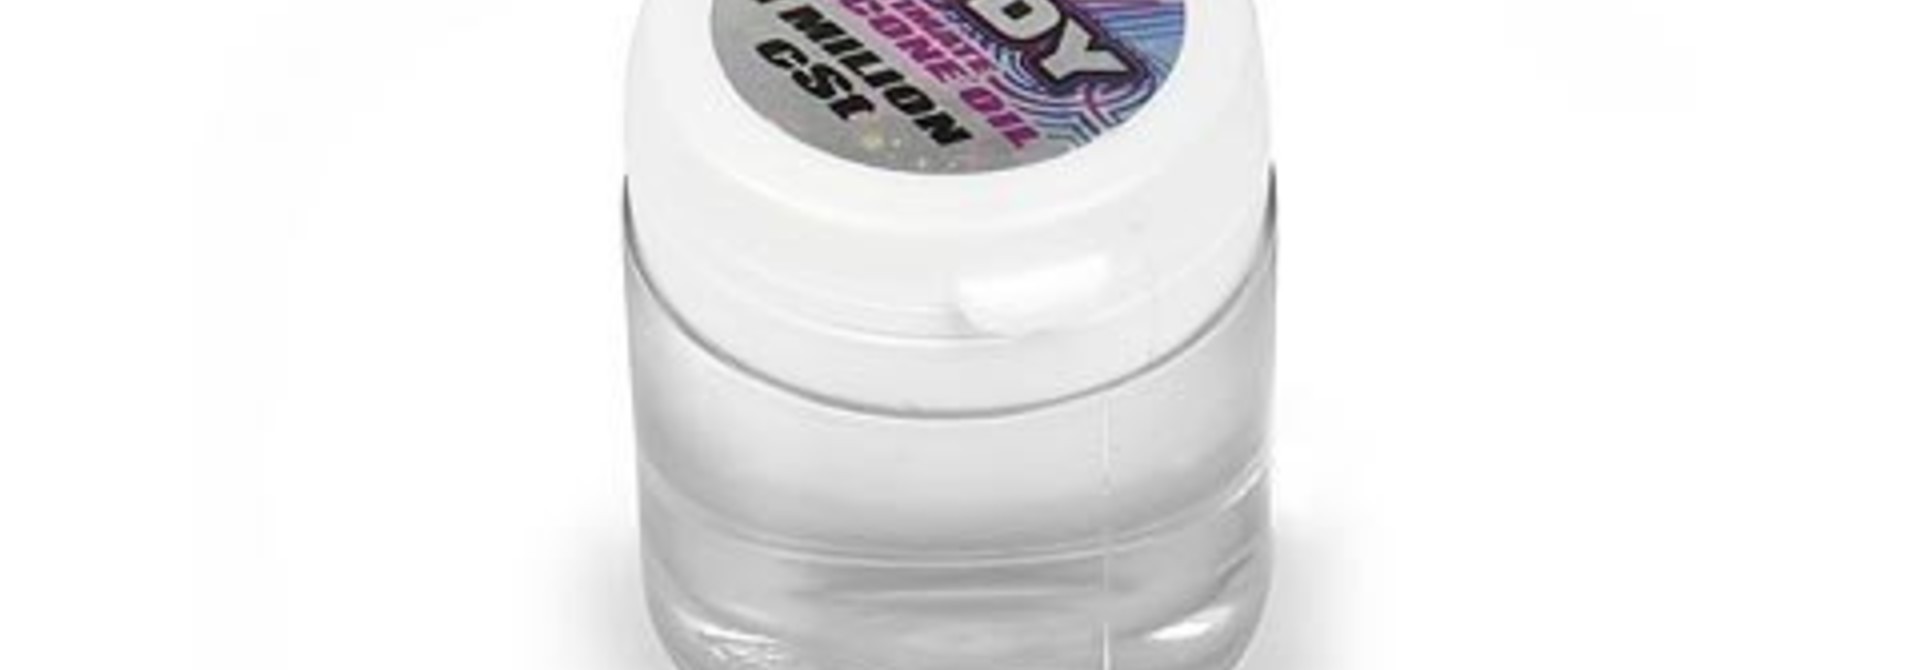 HUDY ULTIMATE SILICONE OIL 1 000 000 cSt - 50ML. H106692